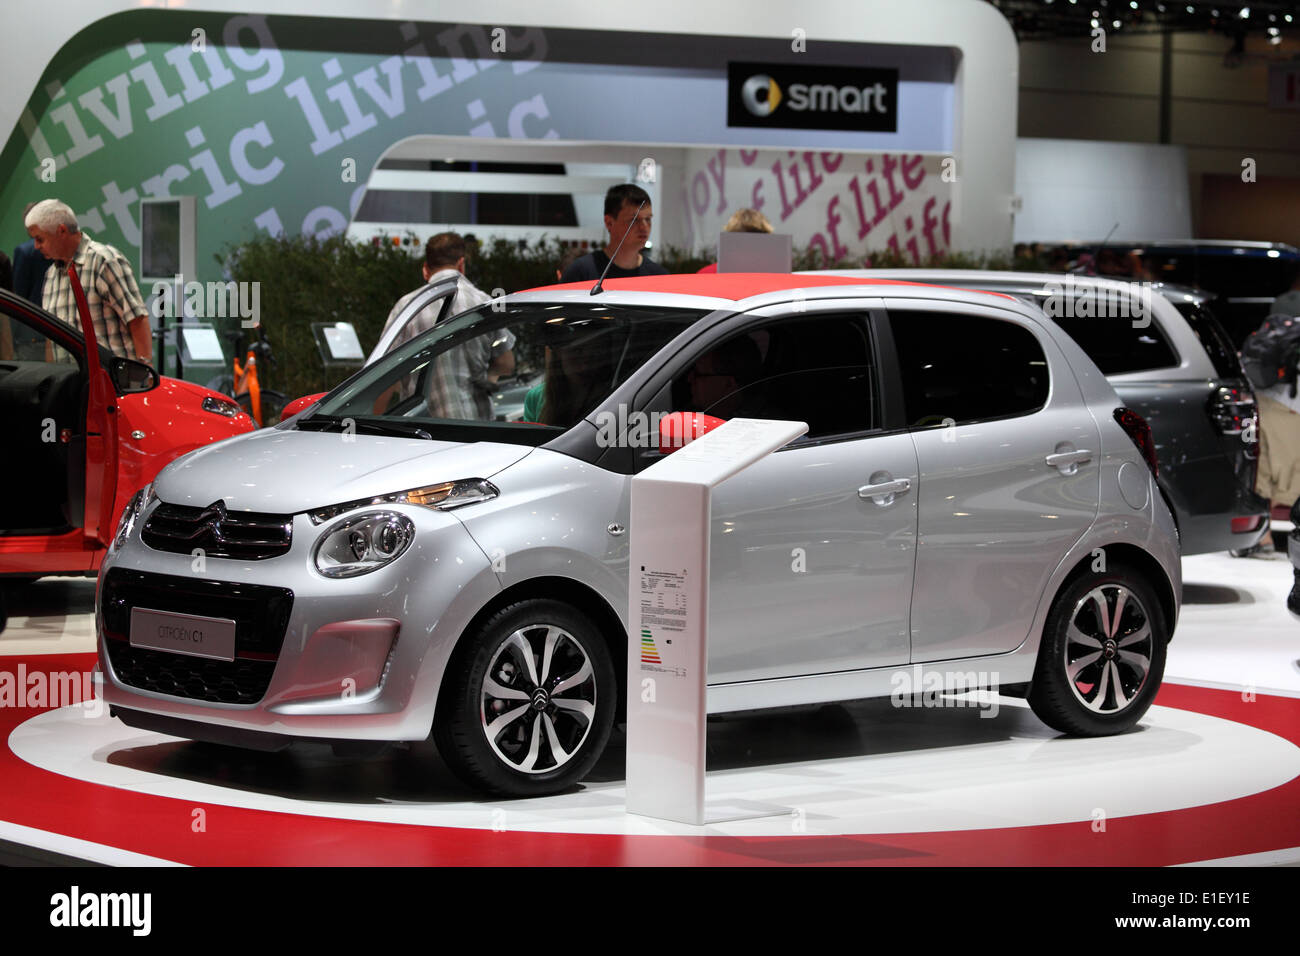 New Citroen C1 city car at the AMI - Auto Mobile International Trade Fair on June 1st, 2014 in Leipzig, Saxony, Germany Stock Photo